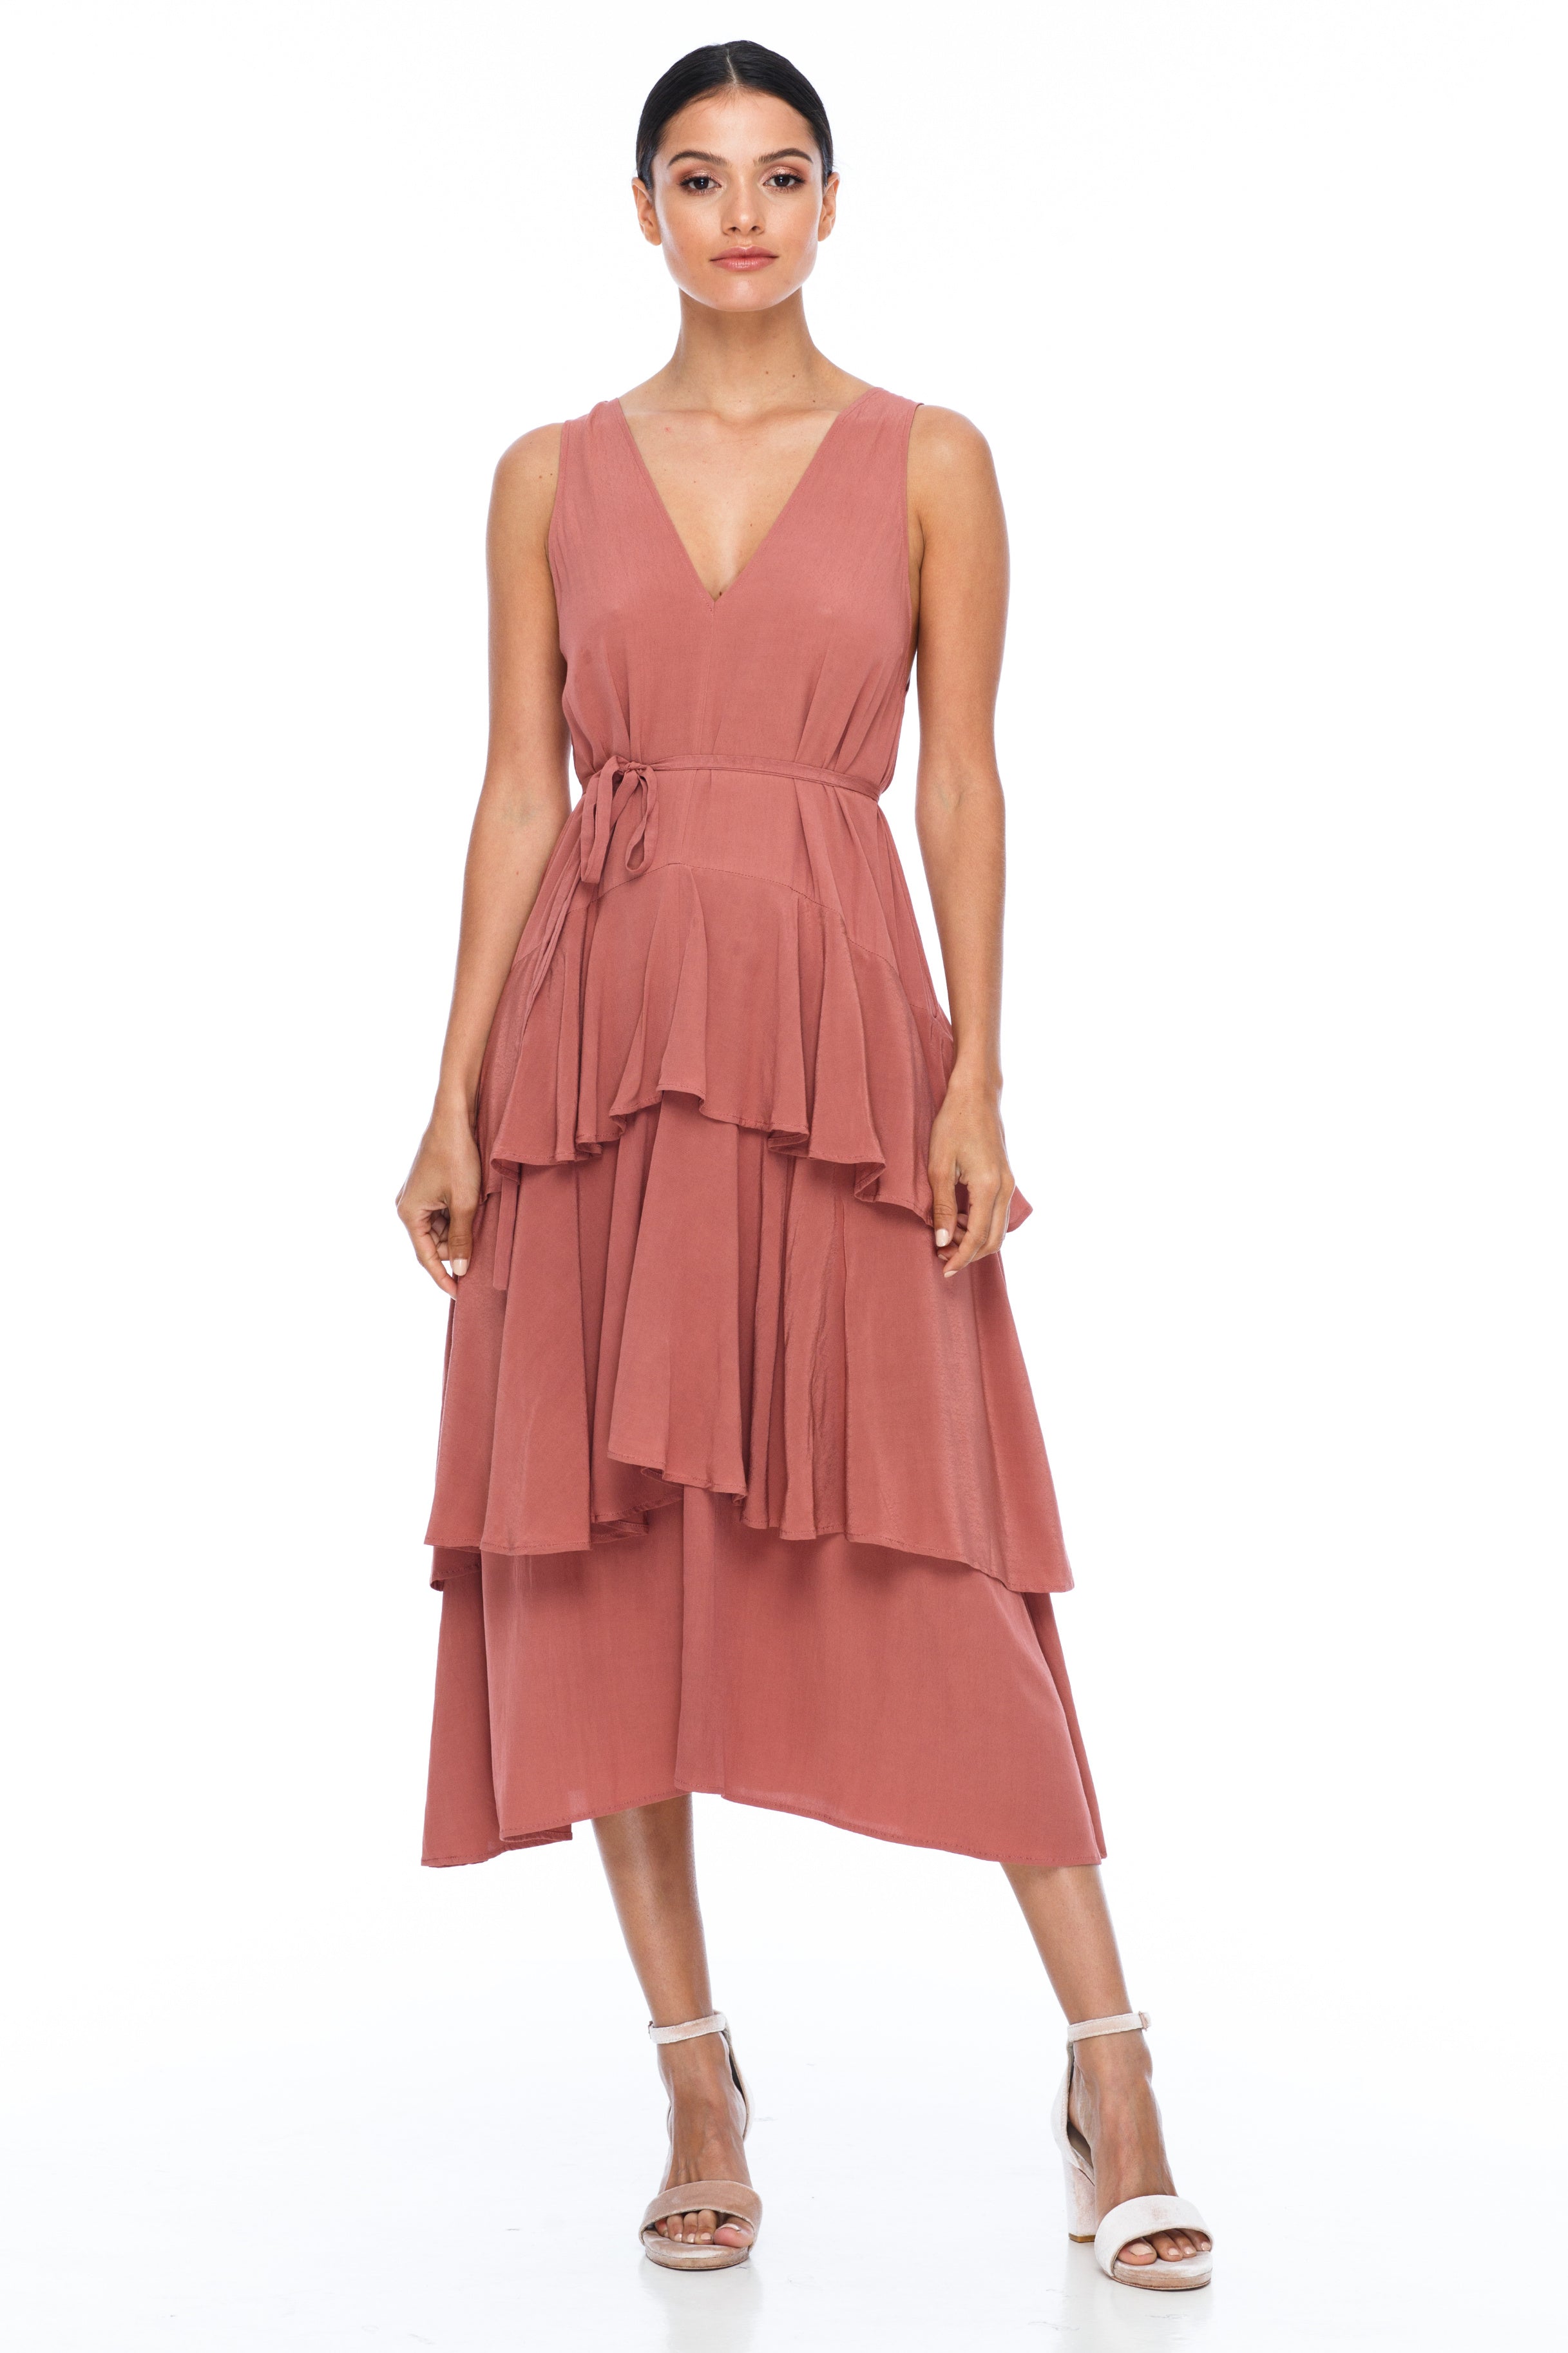 BLAK Bridesmaids Frida Dress in Becca Pink -  A stunning stand out style! With beautiful layered skirt and low v-neckline front and back this dress will help to create the most beautiful wedding photos!